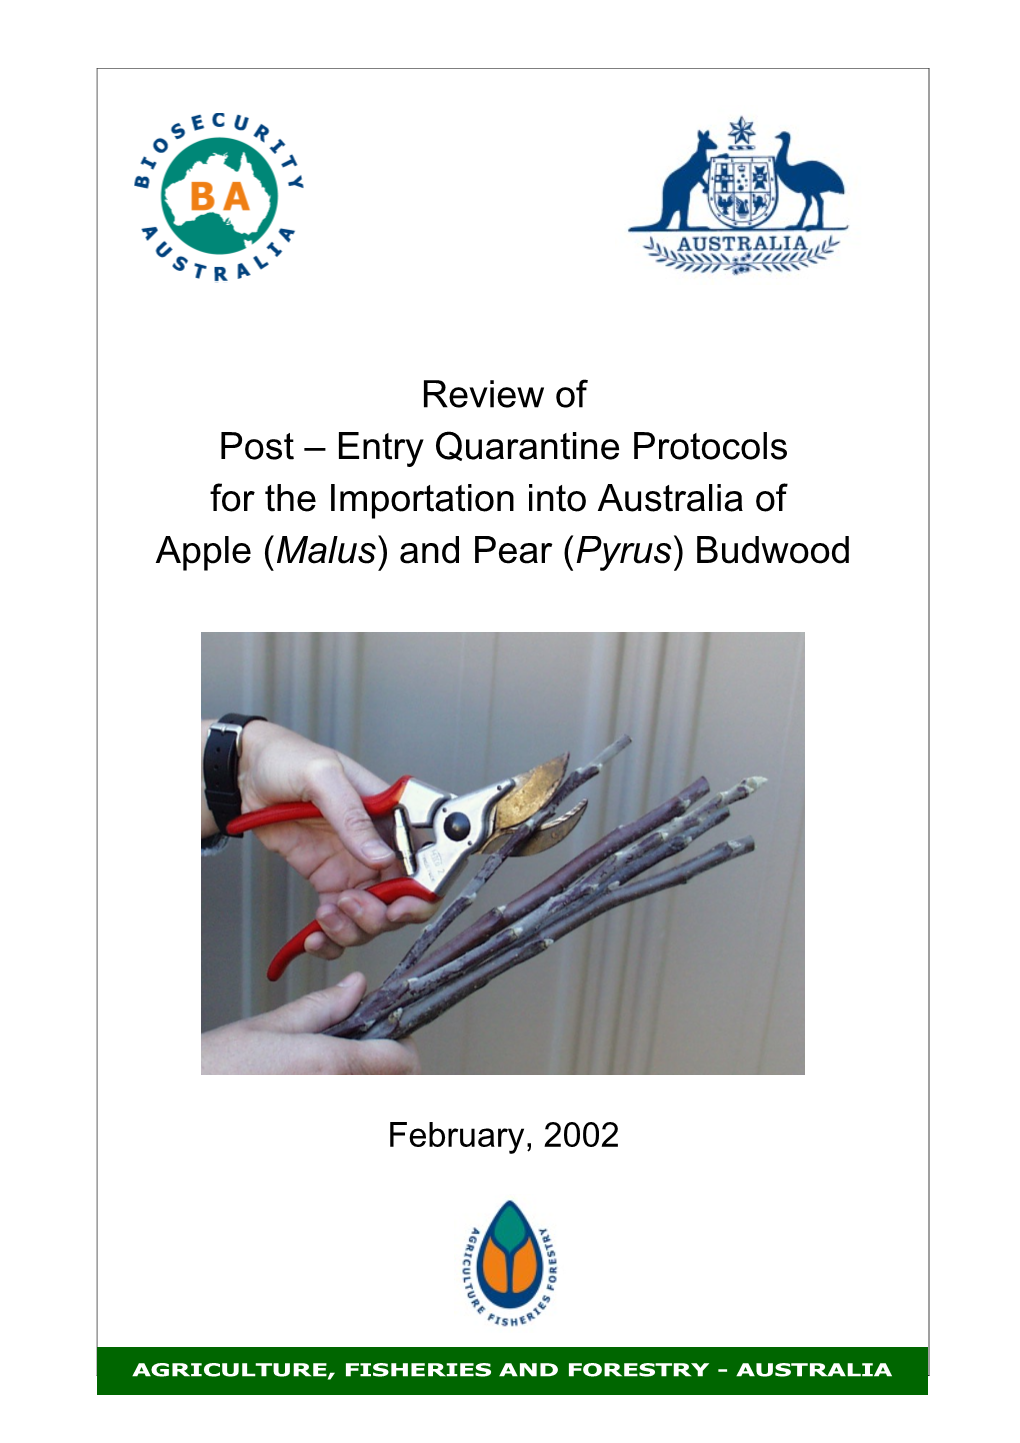 Review of Apple and Pear Post-Entry Quarantine Protocols